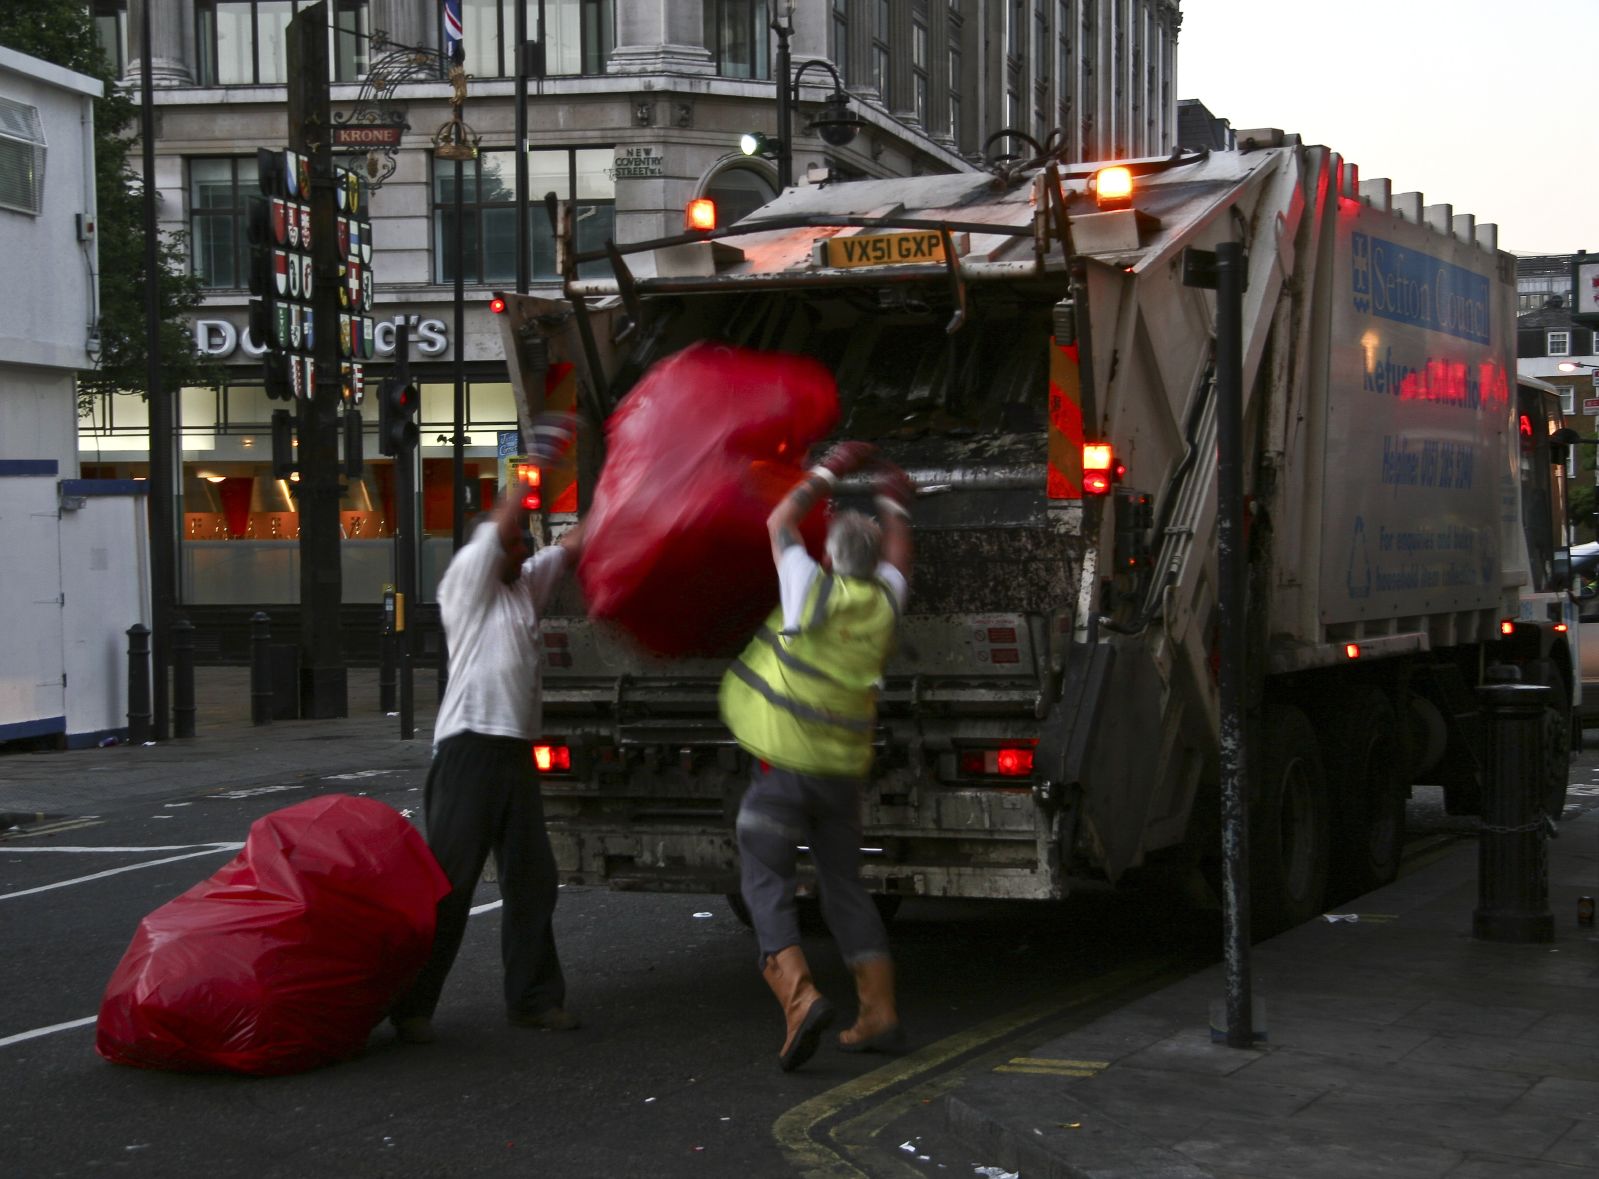 three men lifting a giant frisbee from the back of a garbage truck